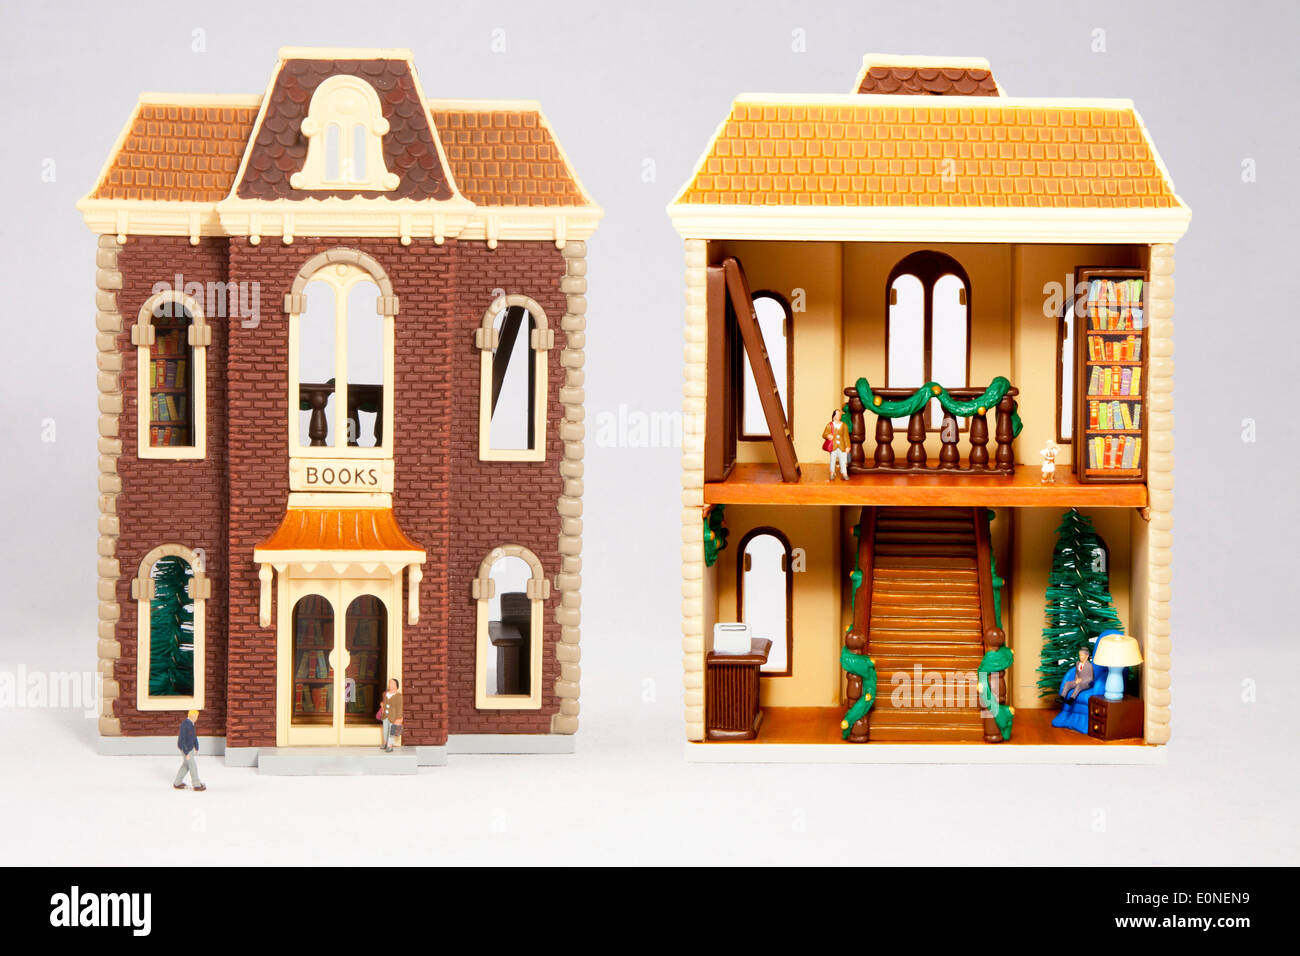 Interior and exterior views of a book store replica with miniature people Stock Photo